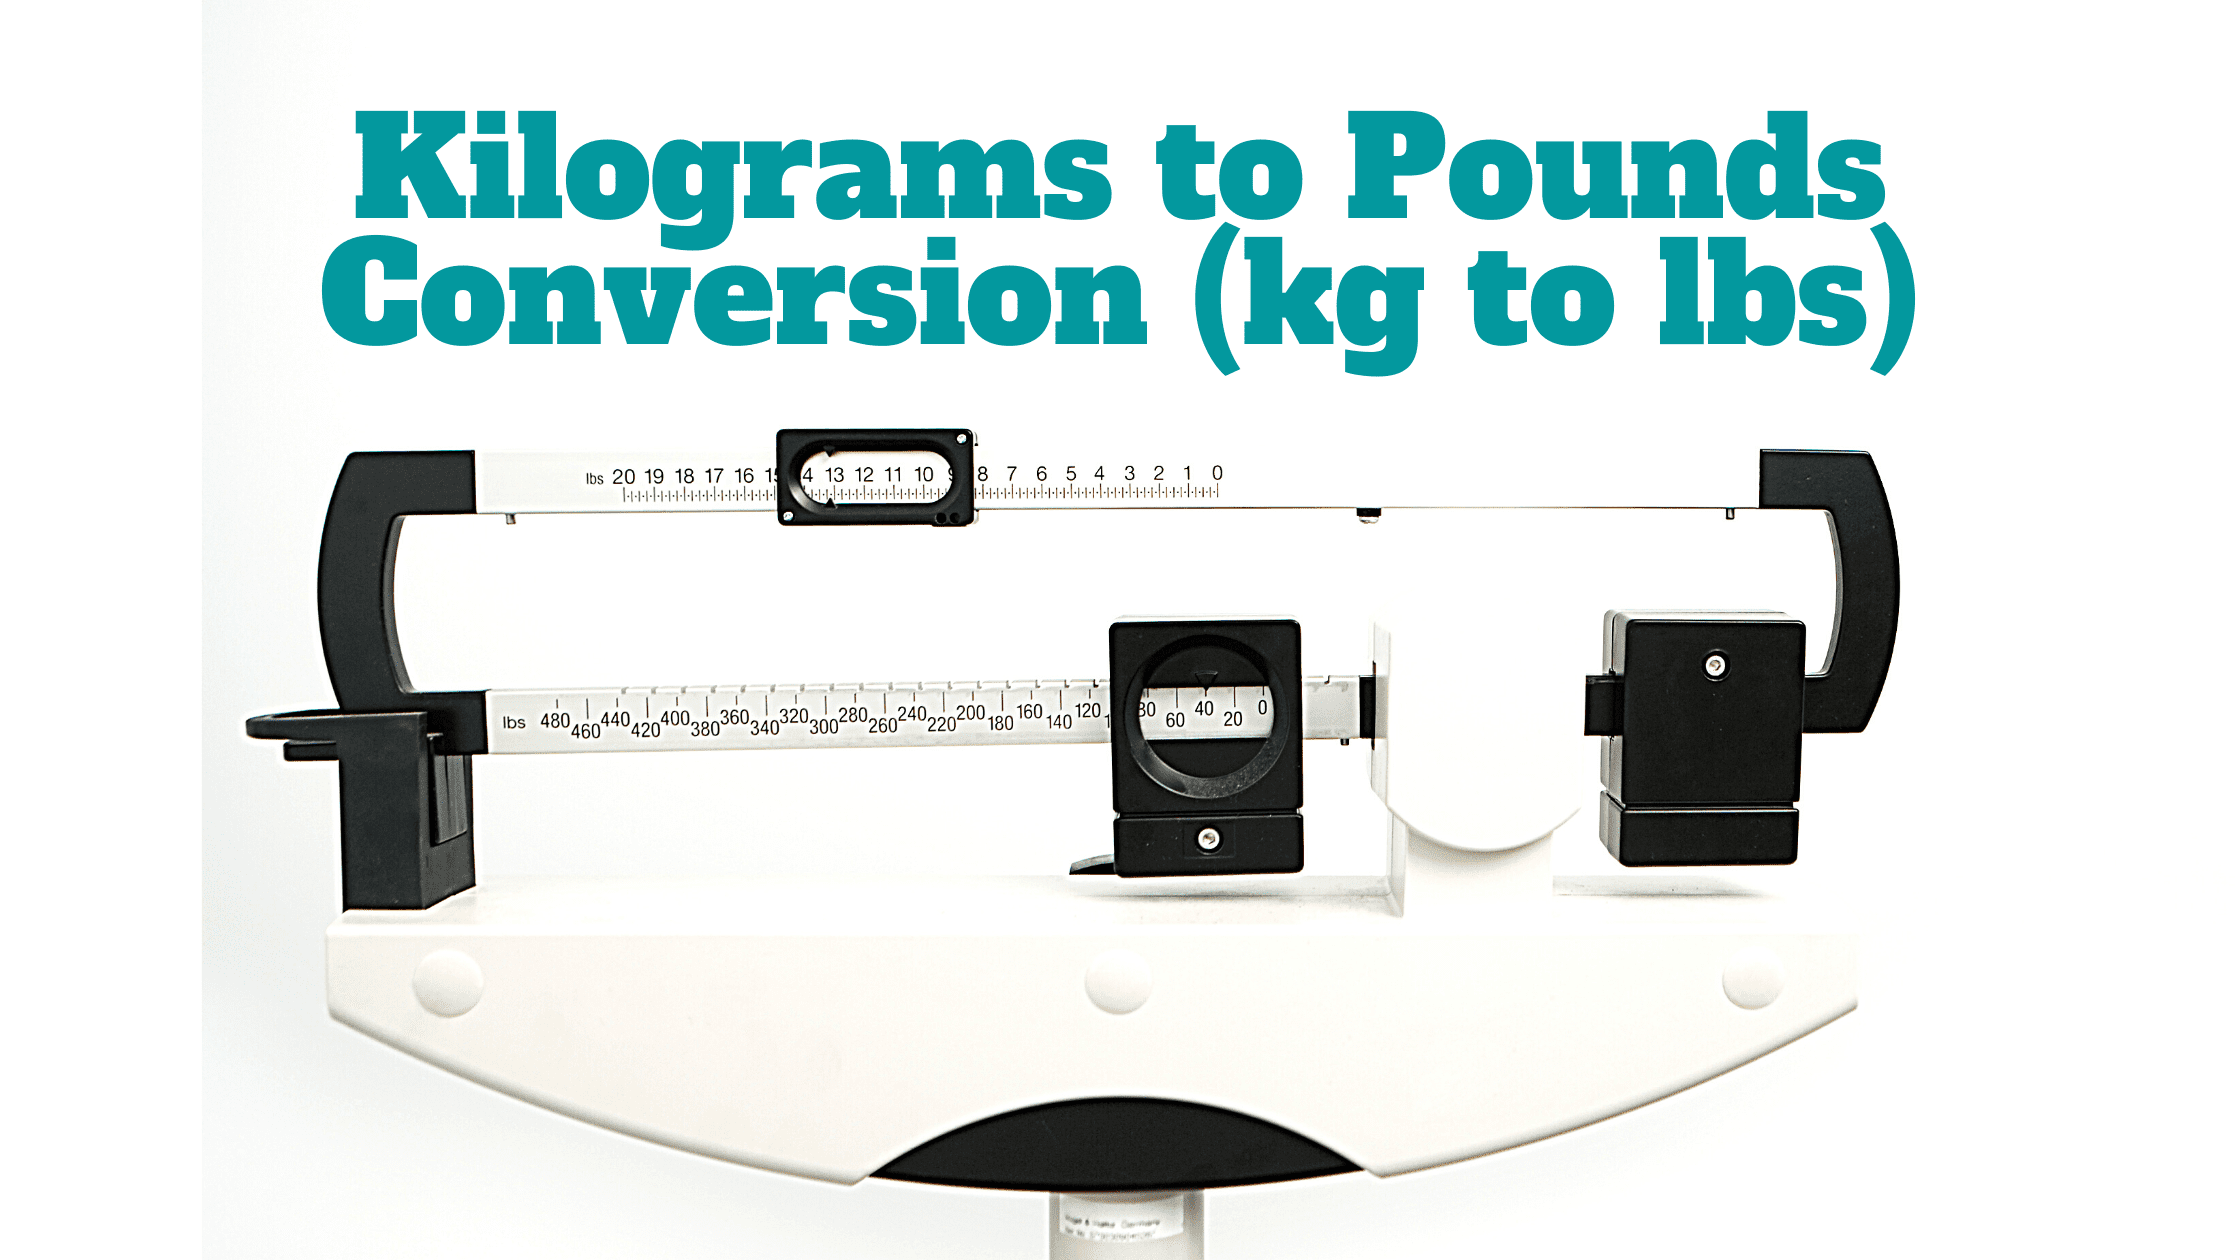 500 kg to lbs Conversion Calculator (Kilograms to Pounds)